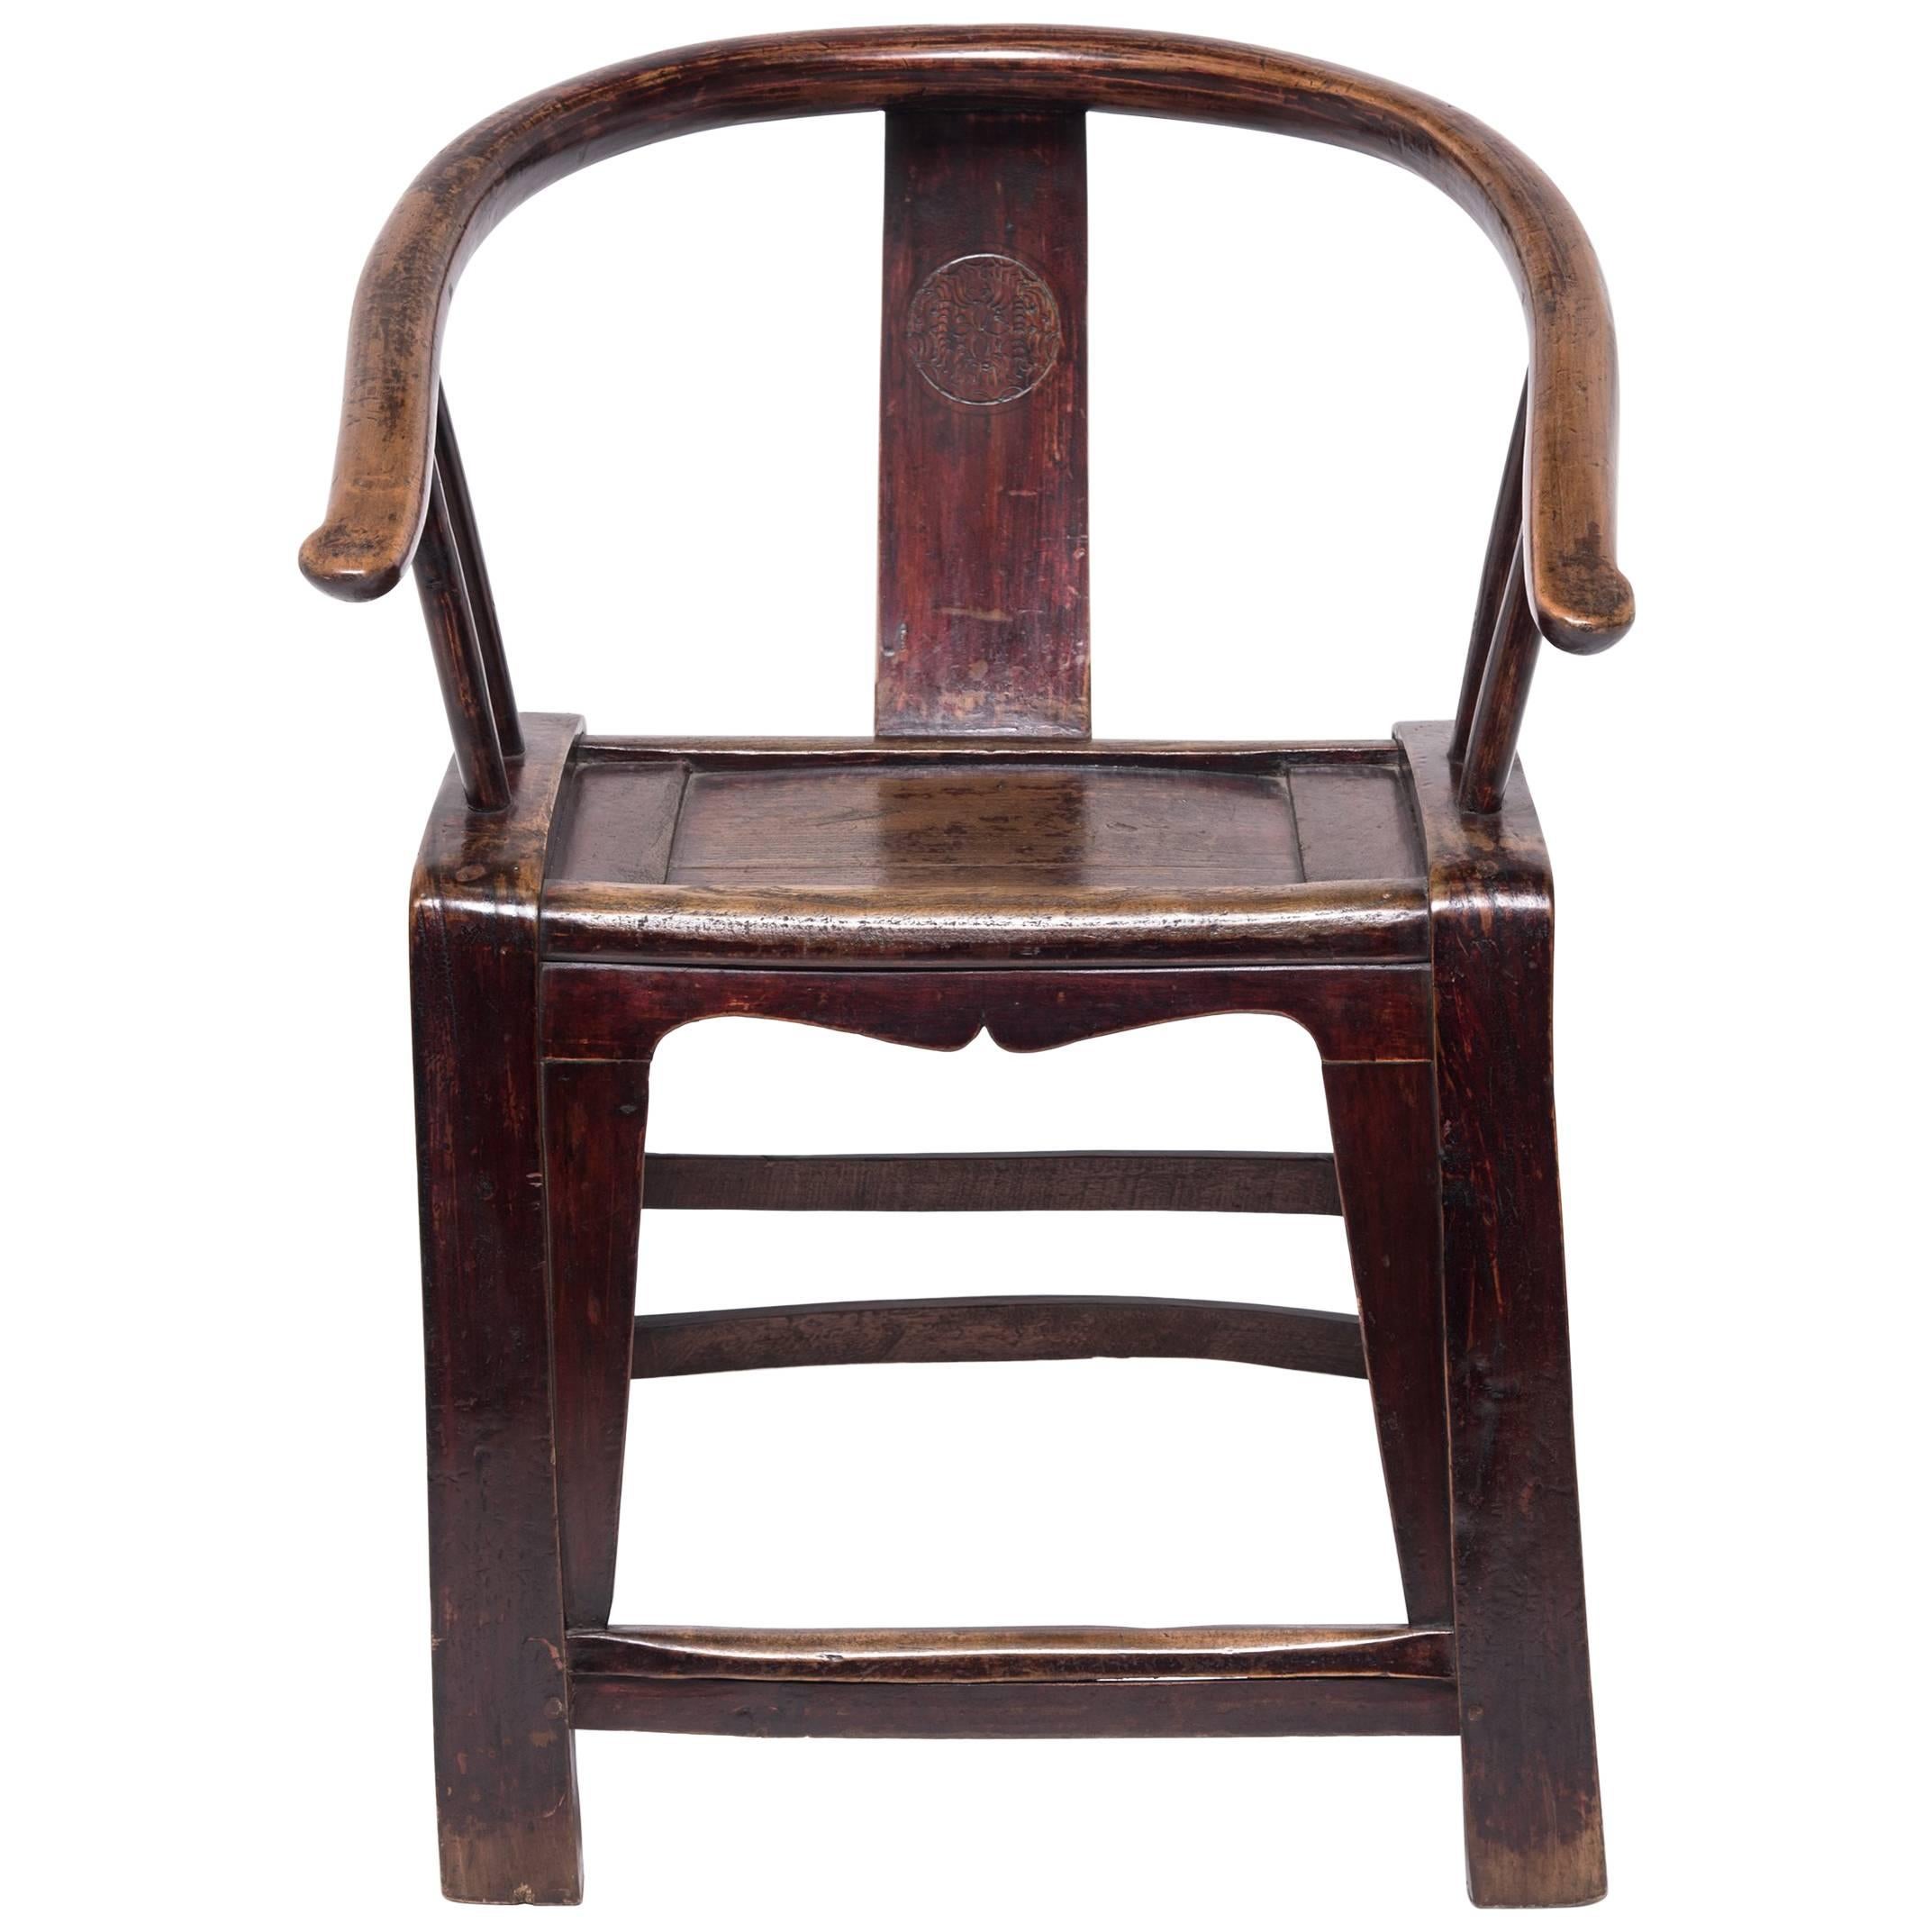 Chinese Provincial Roundback Chair